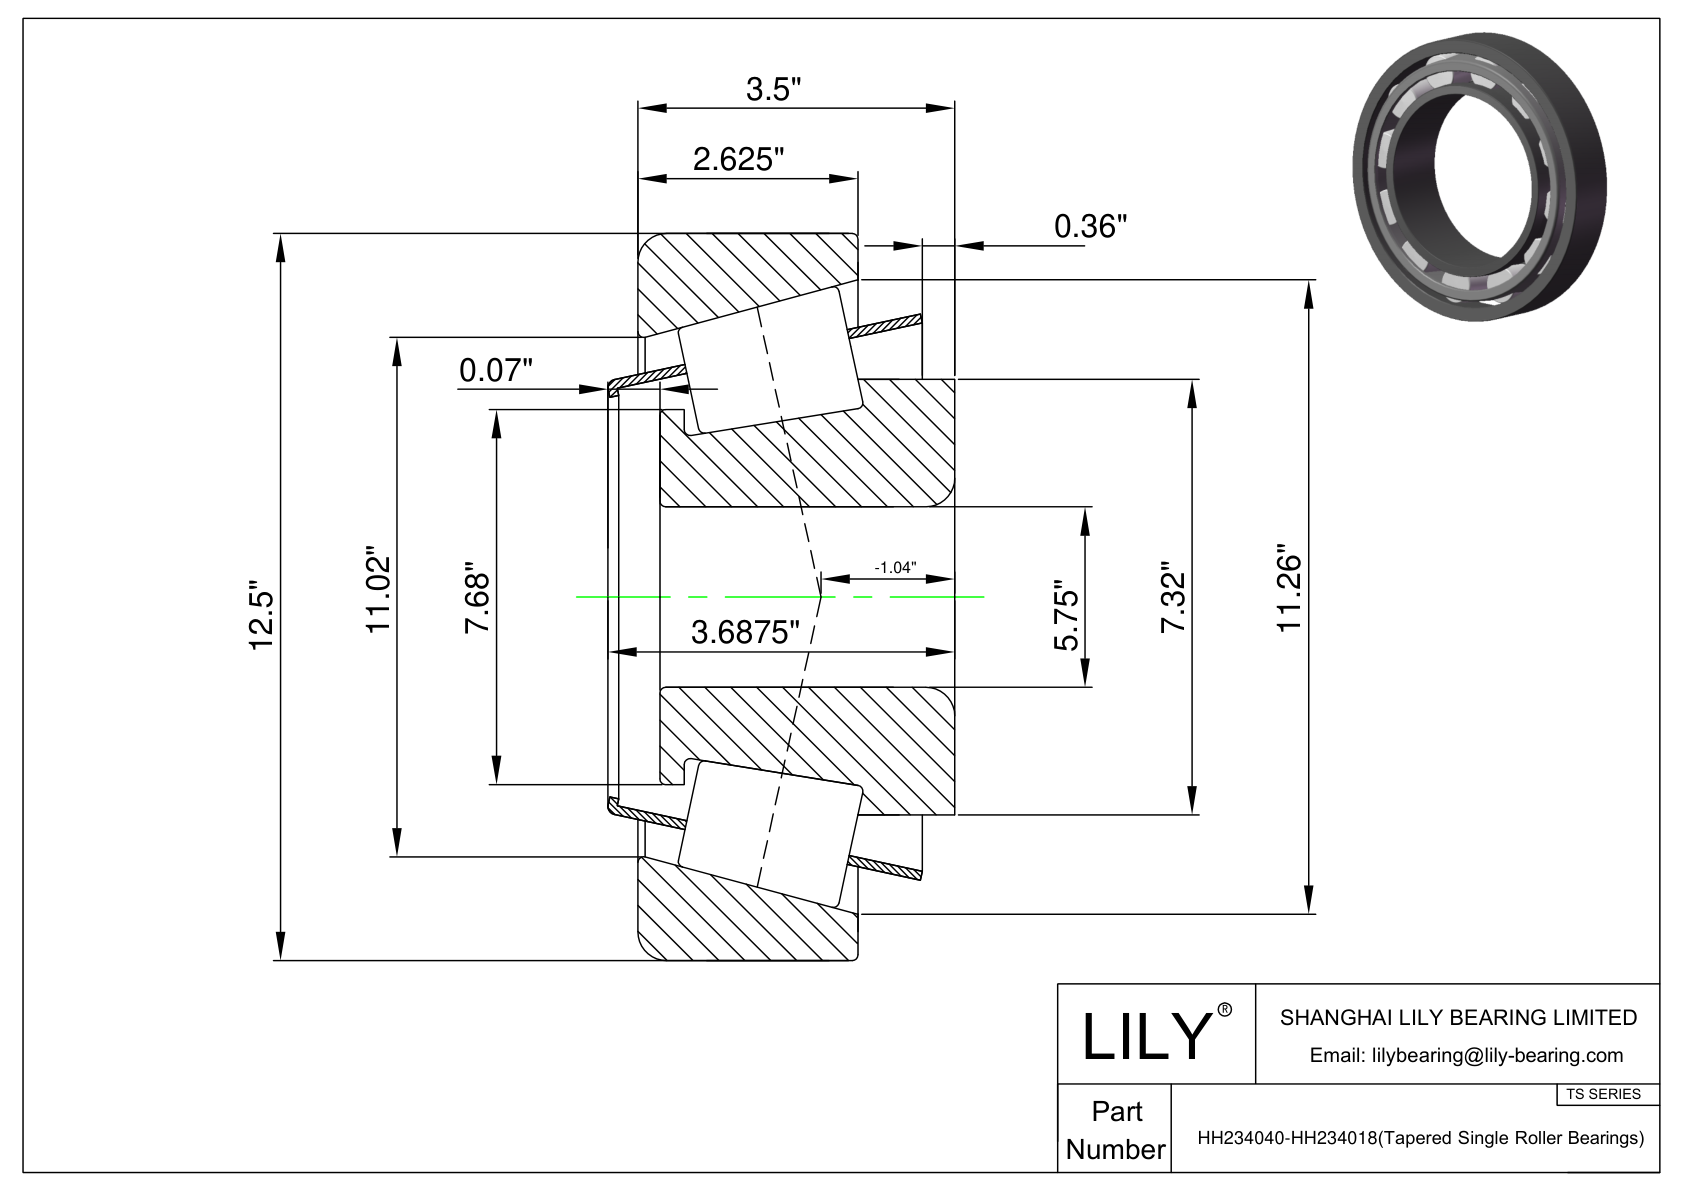 HH234040-HH234018 TS (Tapered Single Roller Bearings) (Imperial) cad drawing